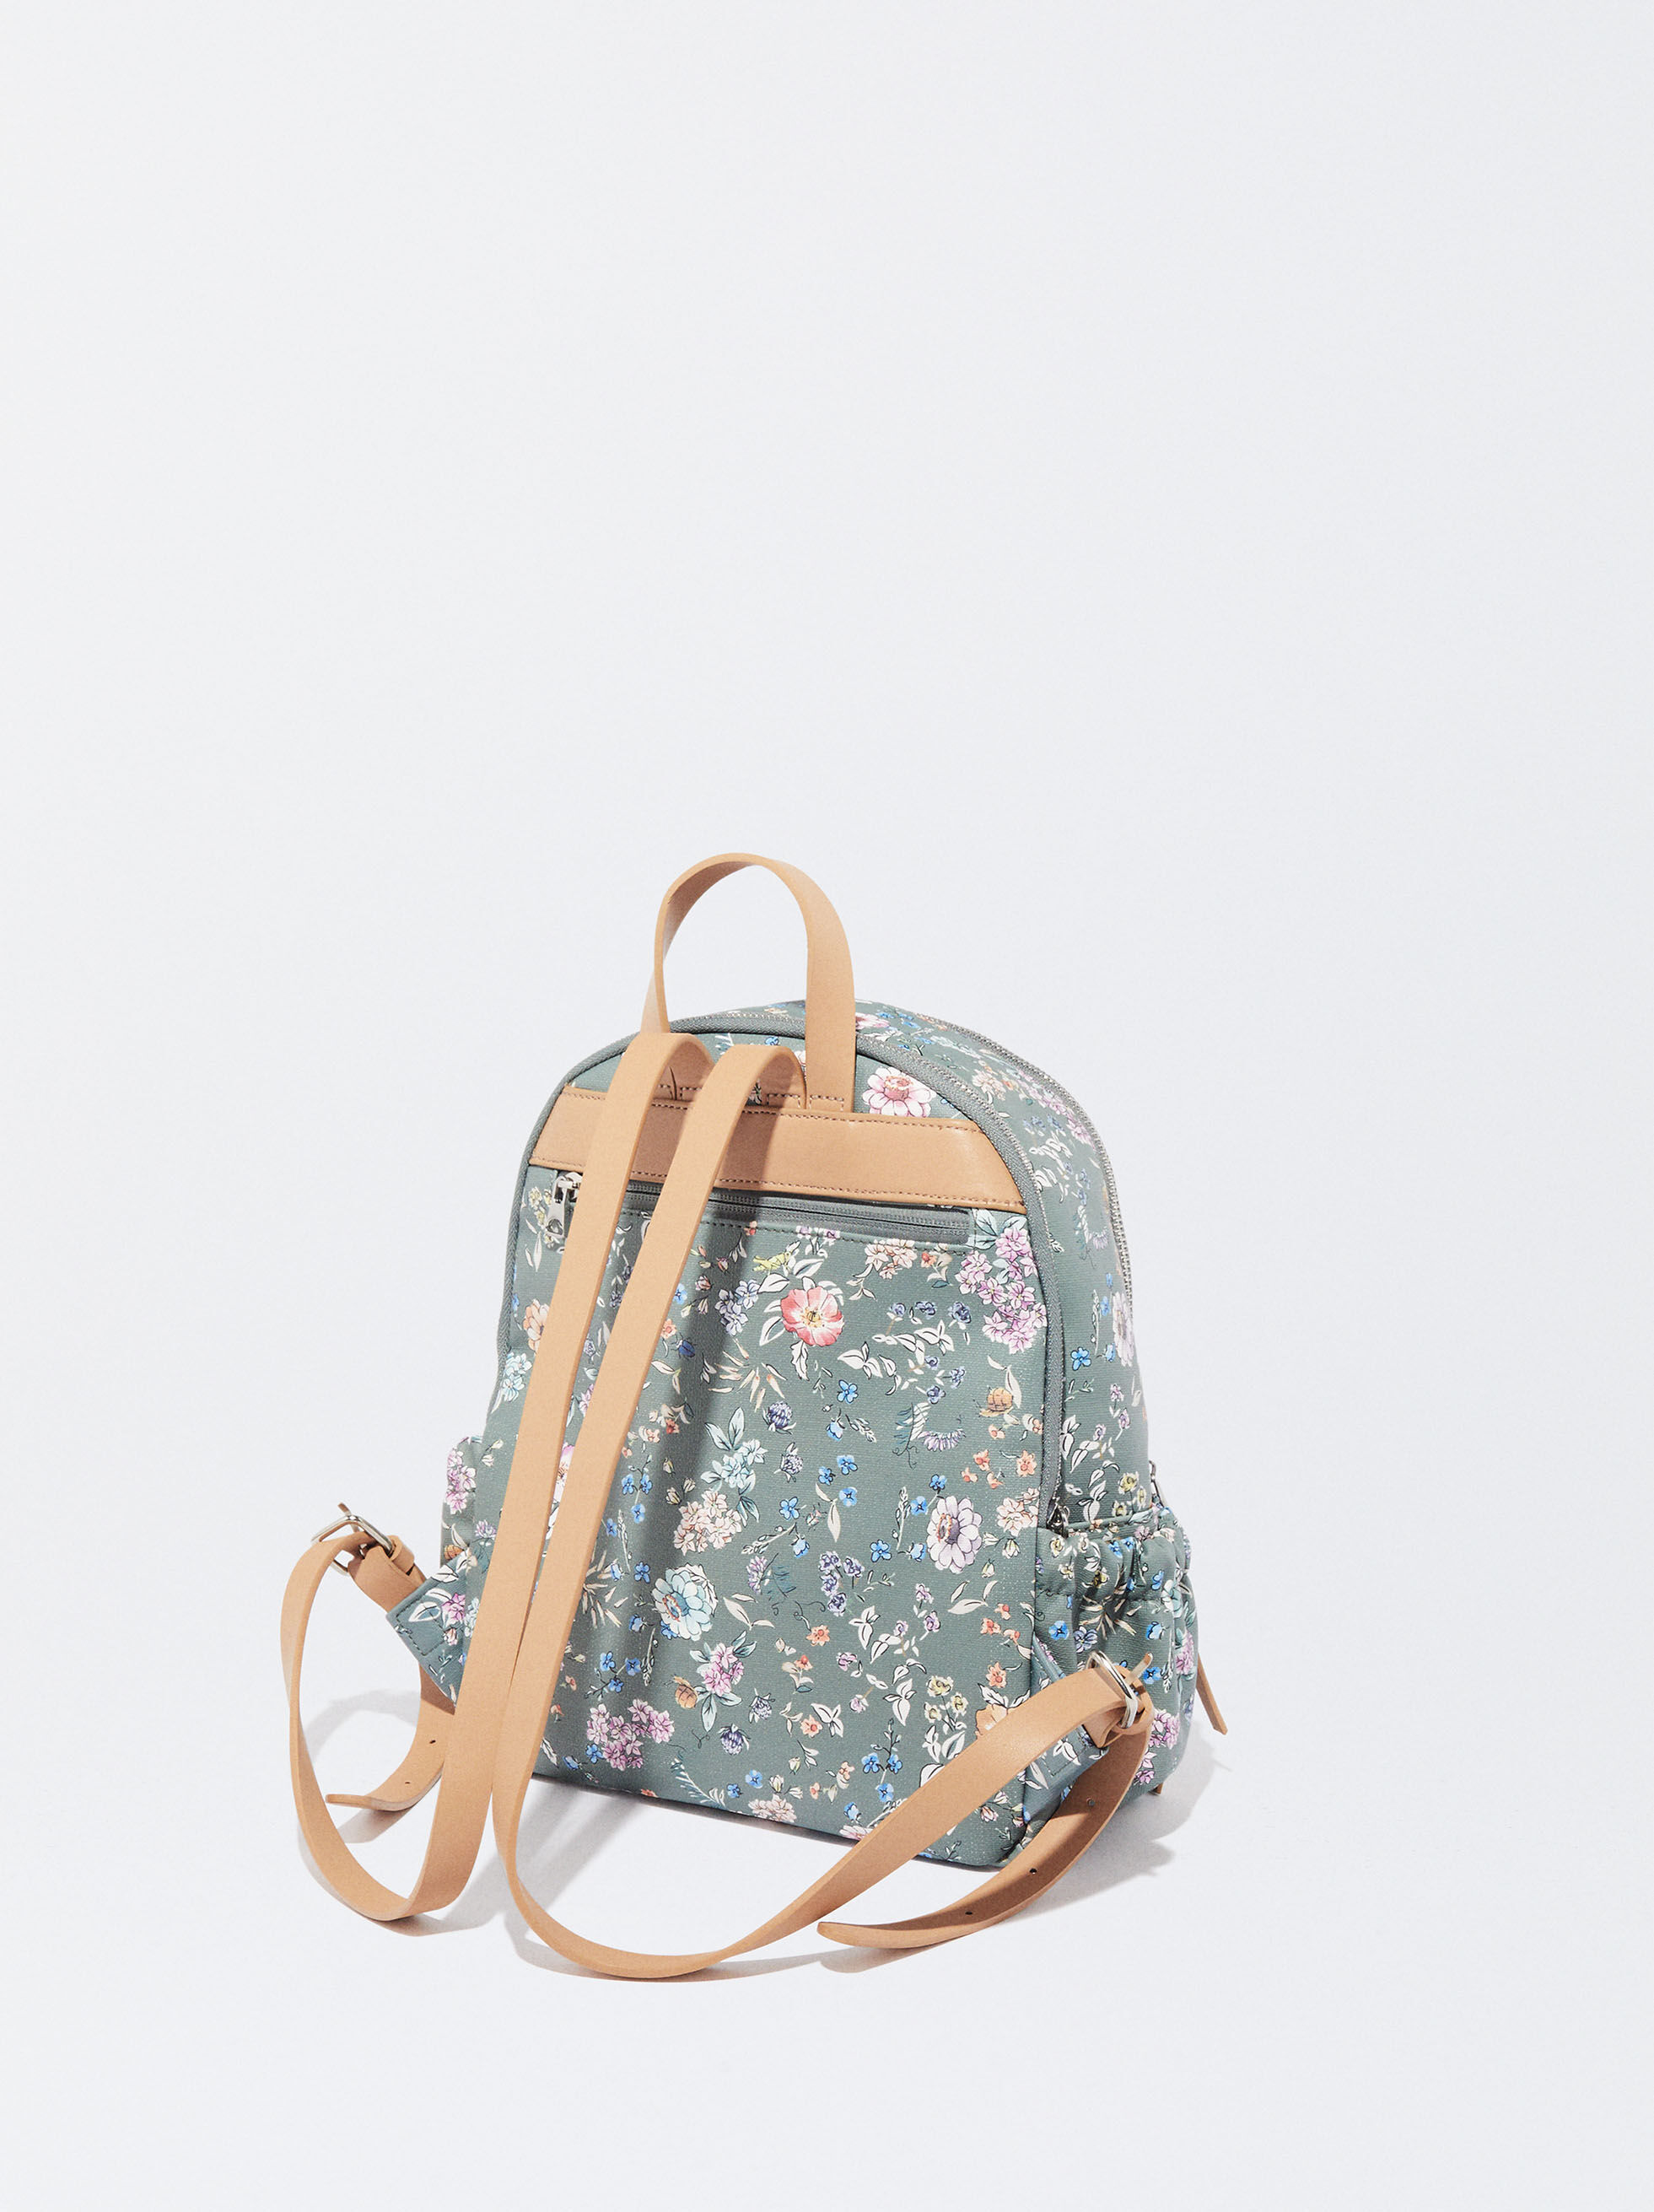 Buy Retro Floral Backpack Online - Accessorize India